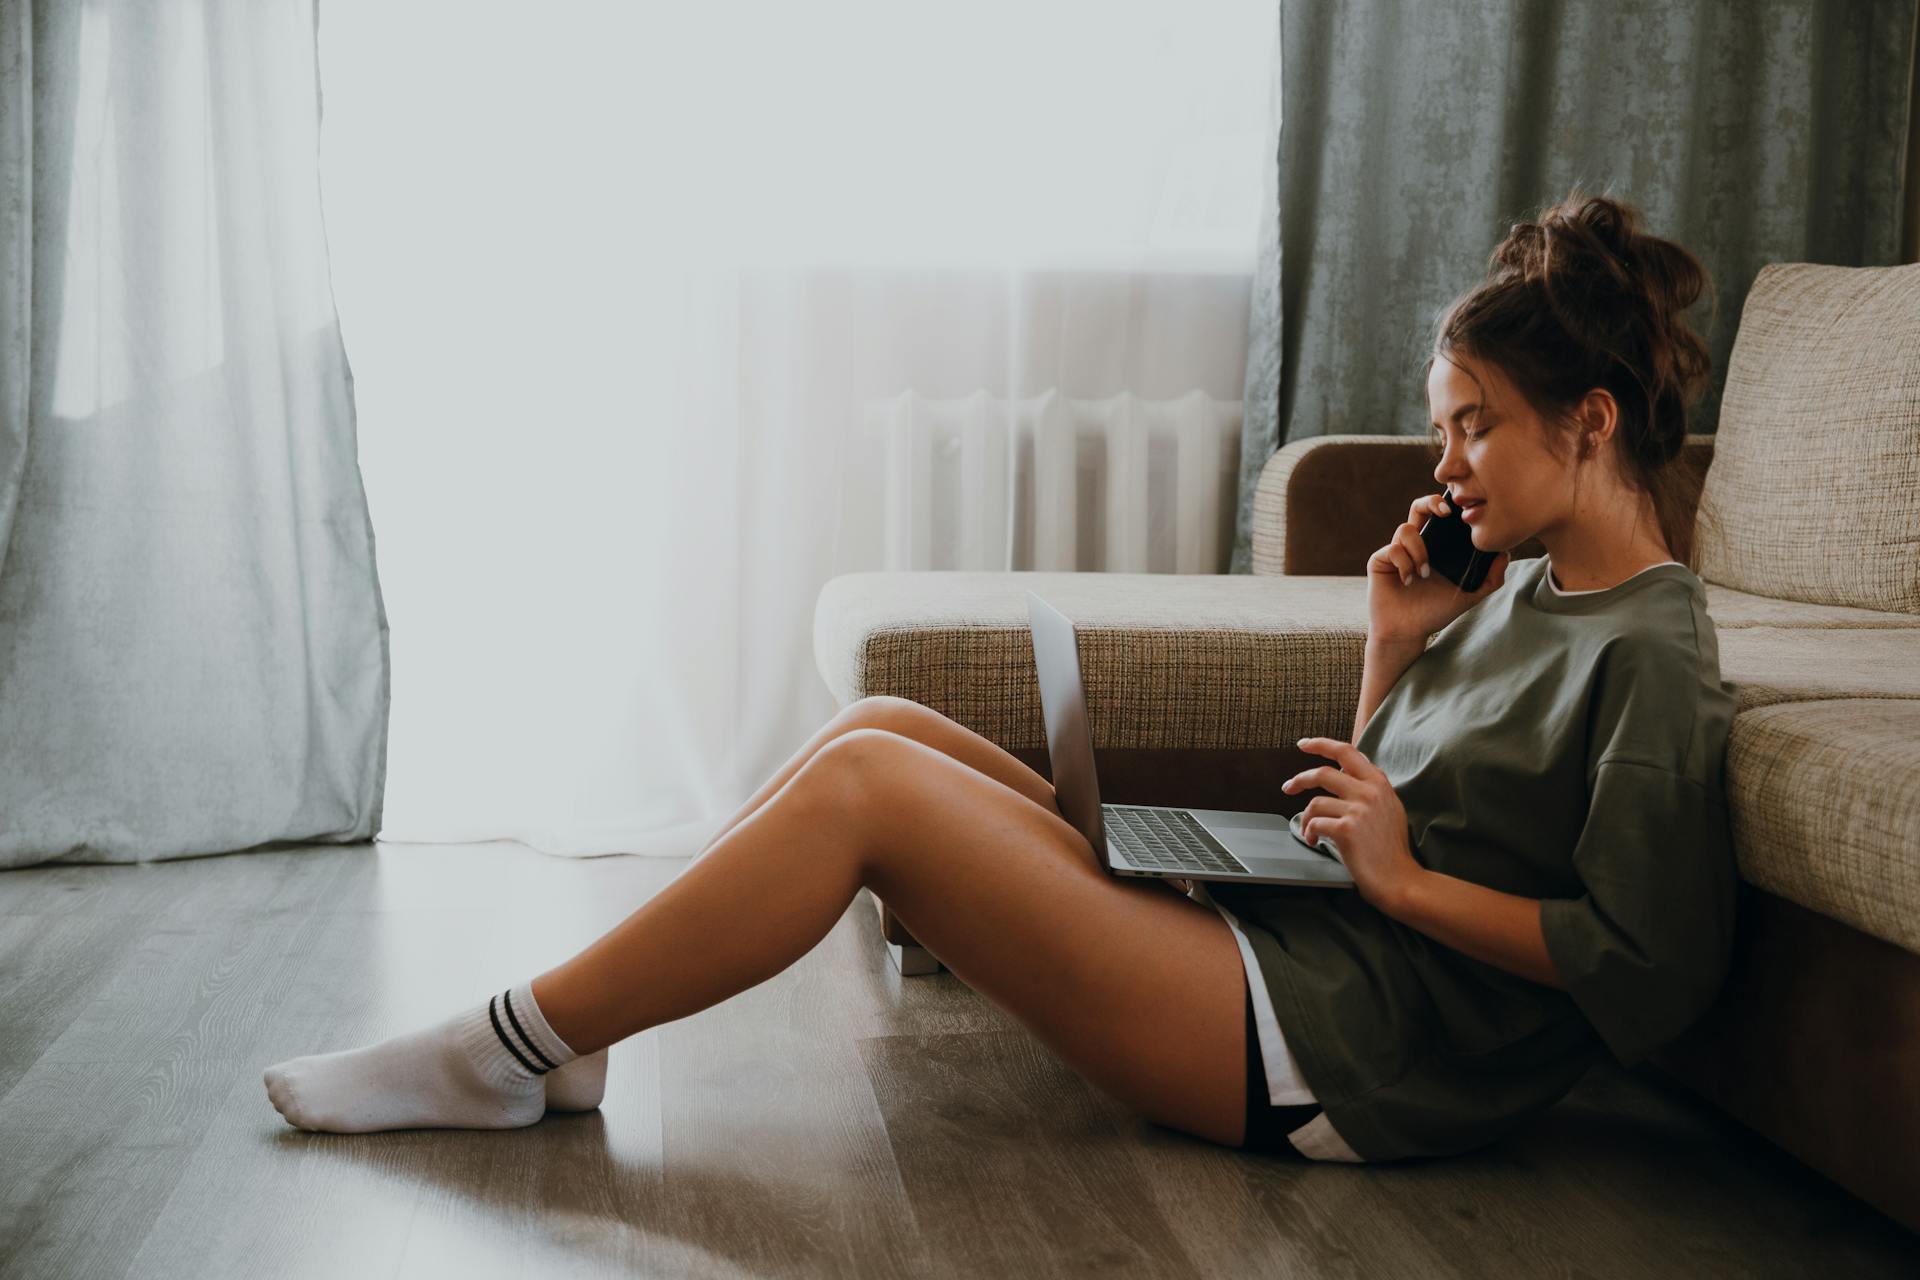 A young woman talking on the phone while using laptop | Source: Pexels